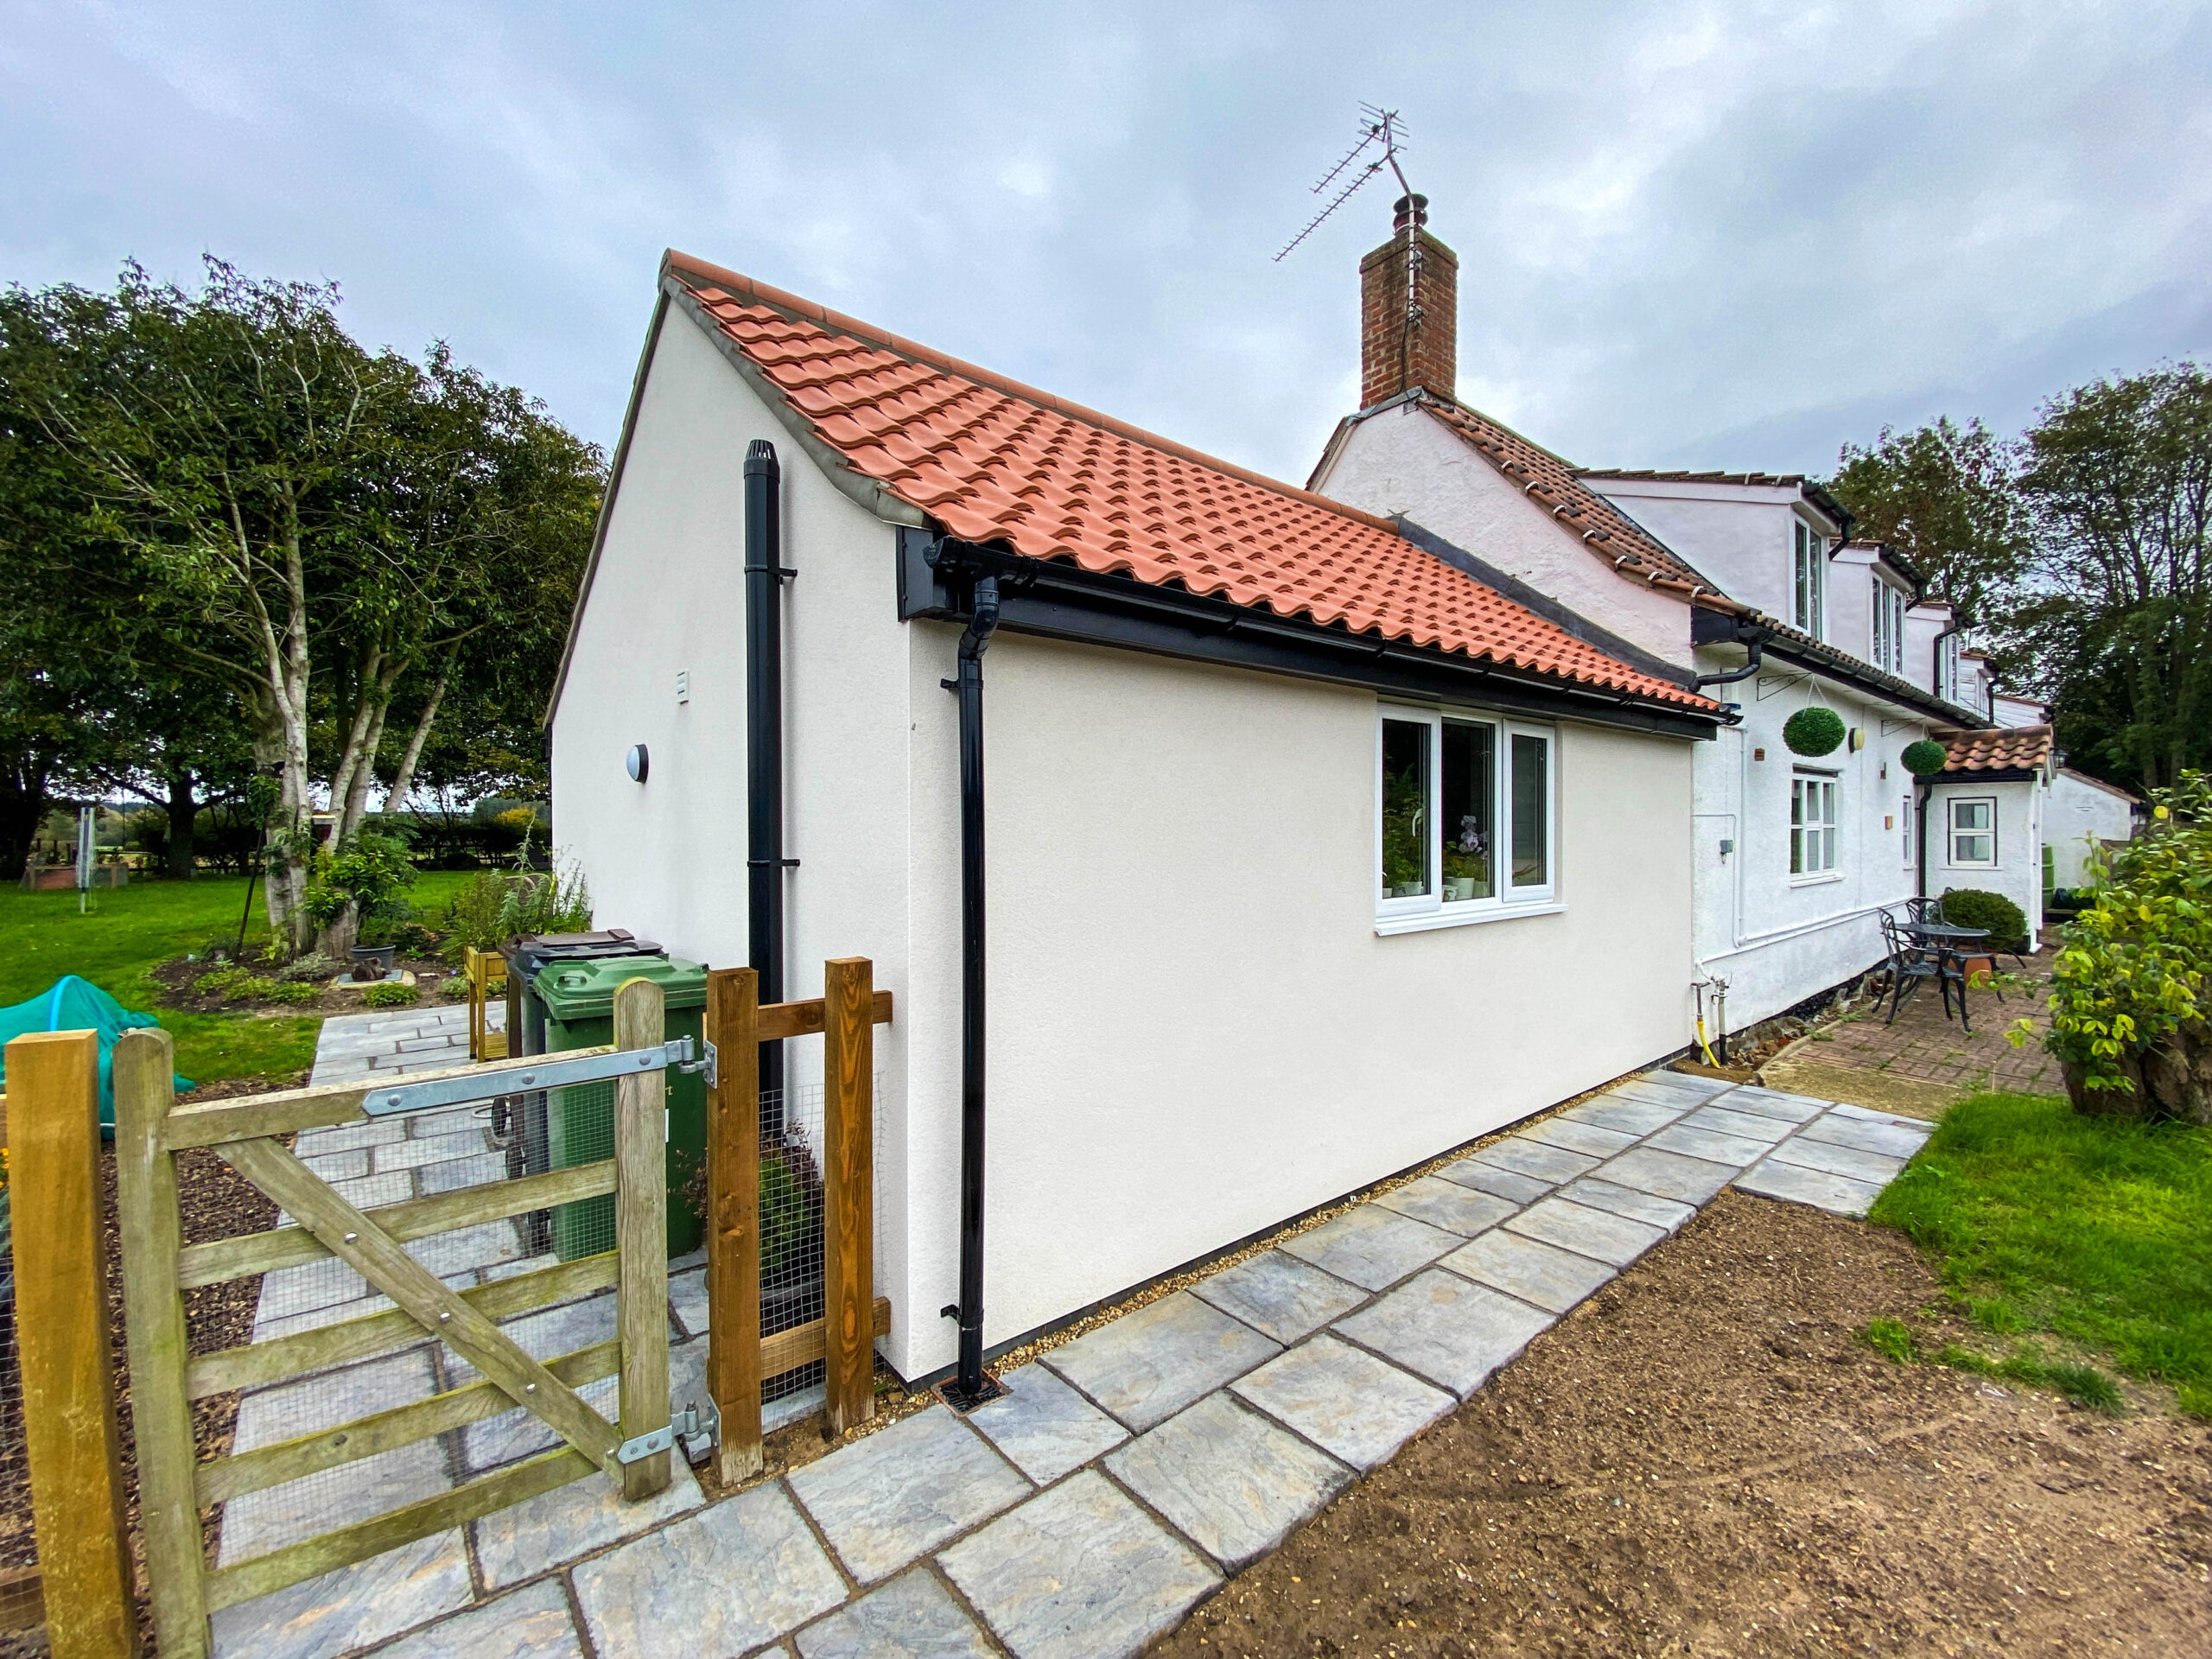 Extension for a lovely cottage in Wretham, Norfolk.